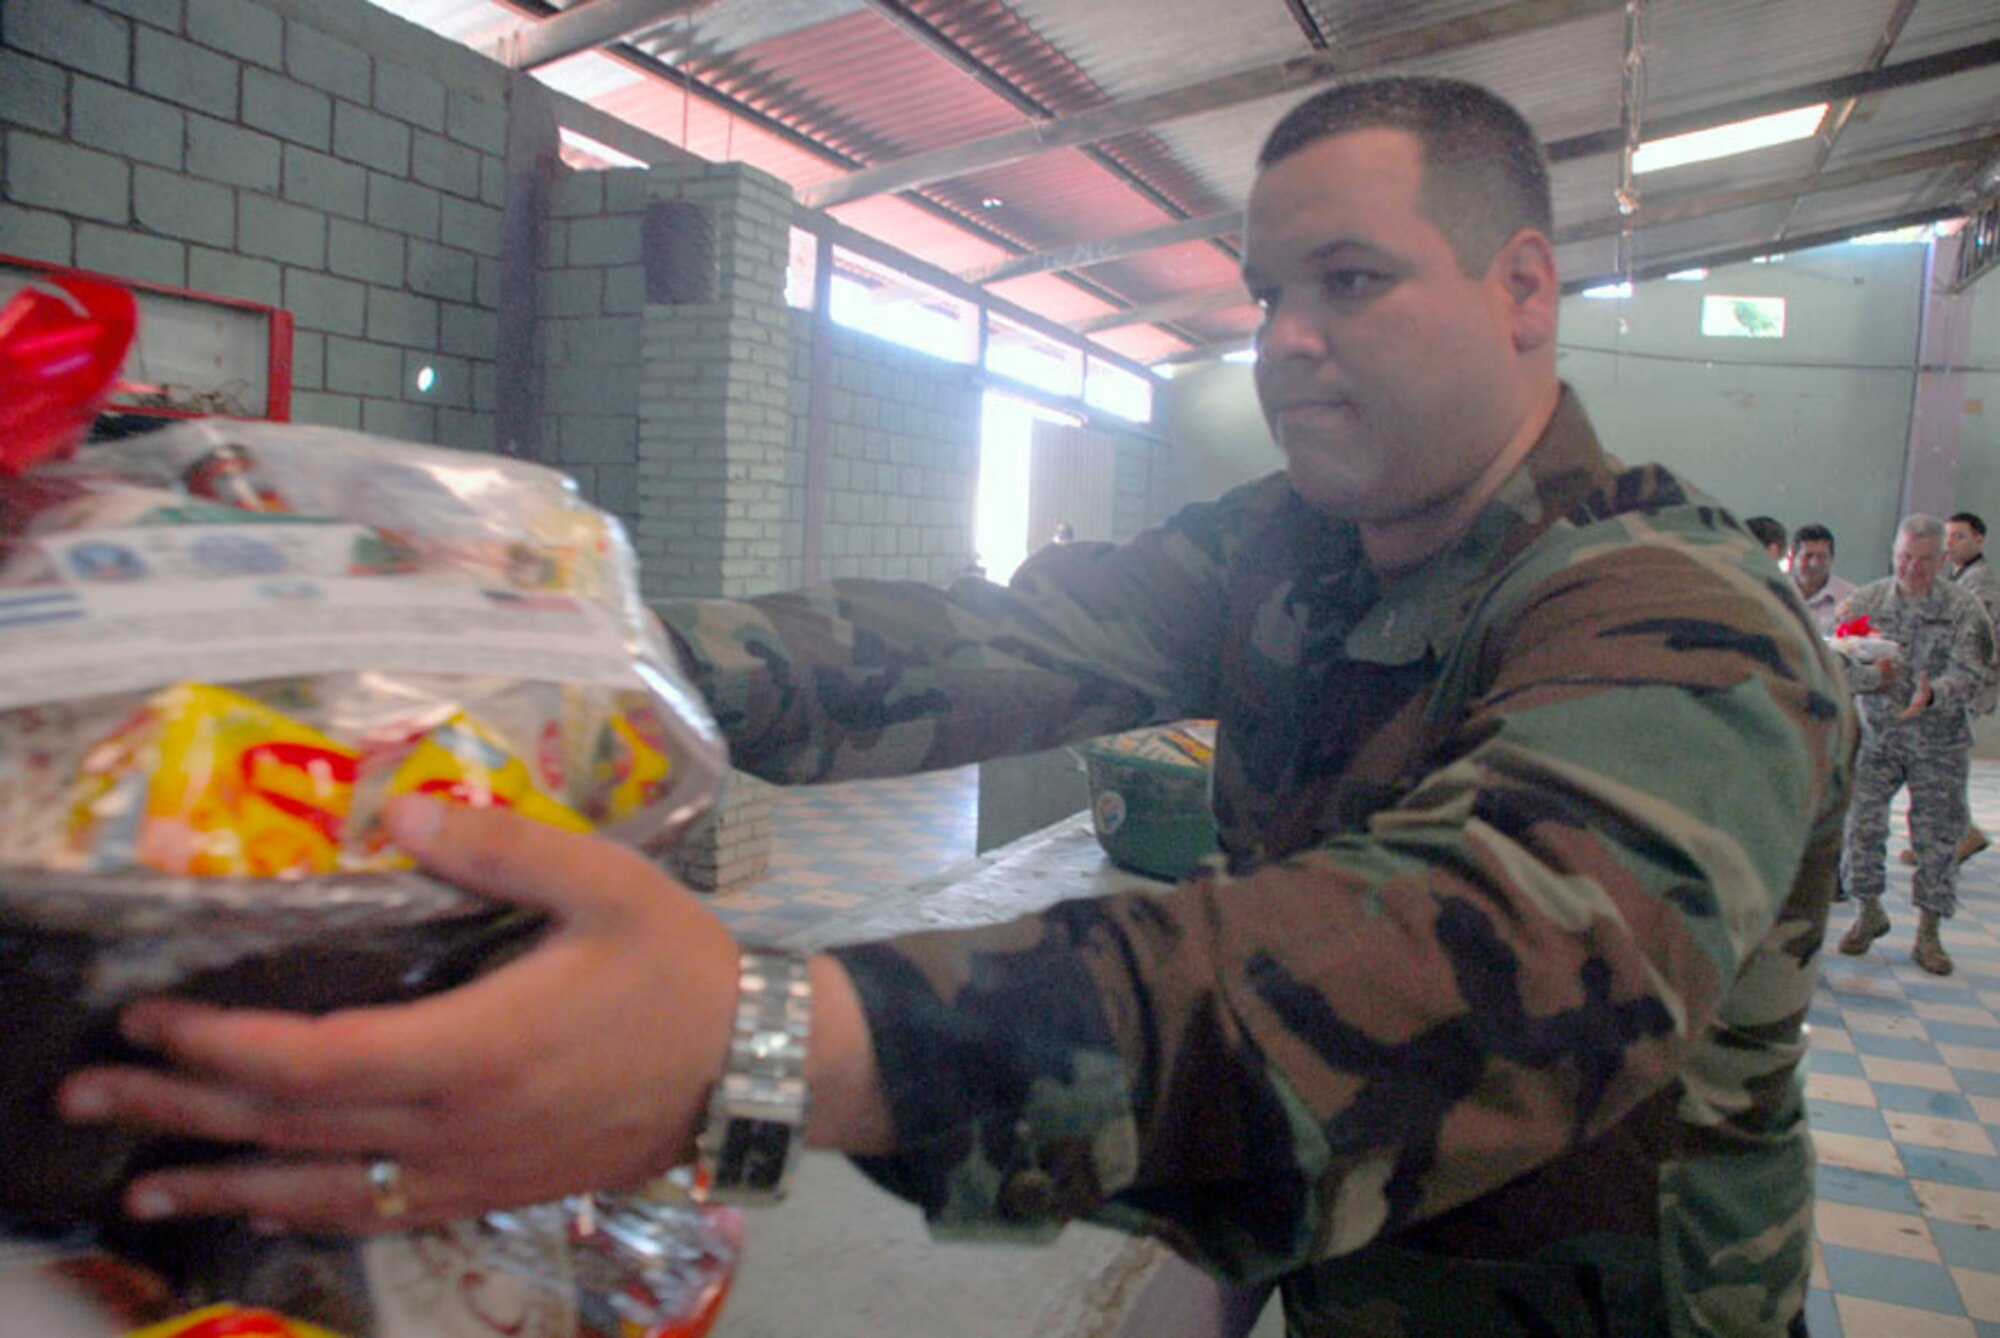 AJUTERIQUE, Honduras - Navy Petty Officer 3rd Class David Lazo, Joint Task Force-Bravo, assists moving food baskets to be given out to more than 100 families here Dec. 9. JTF-Bravo and U.S. Southern Command gave the baskets filled with essential food and supplies to families affected by widespread flooding recently. (U.S. Air Force photo by Staff Sgt. Joel Mease)